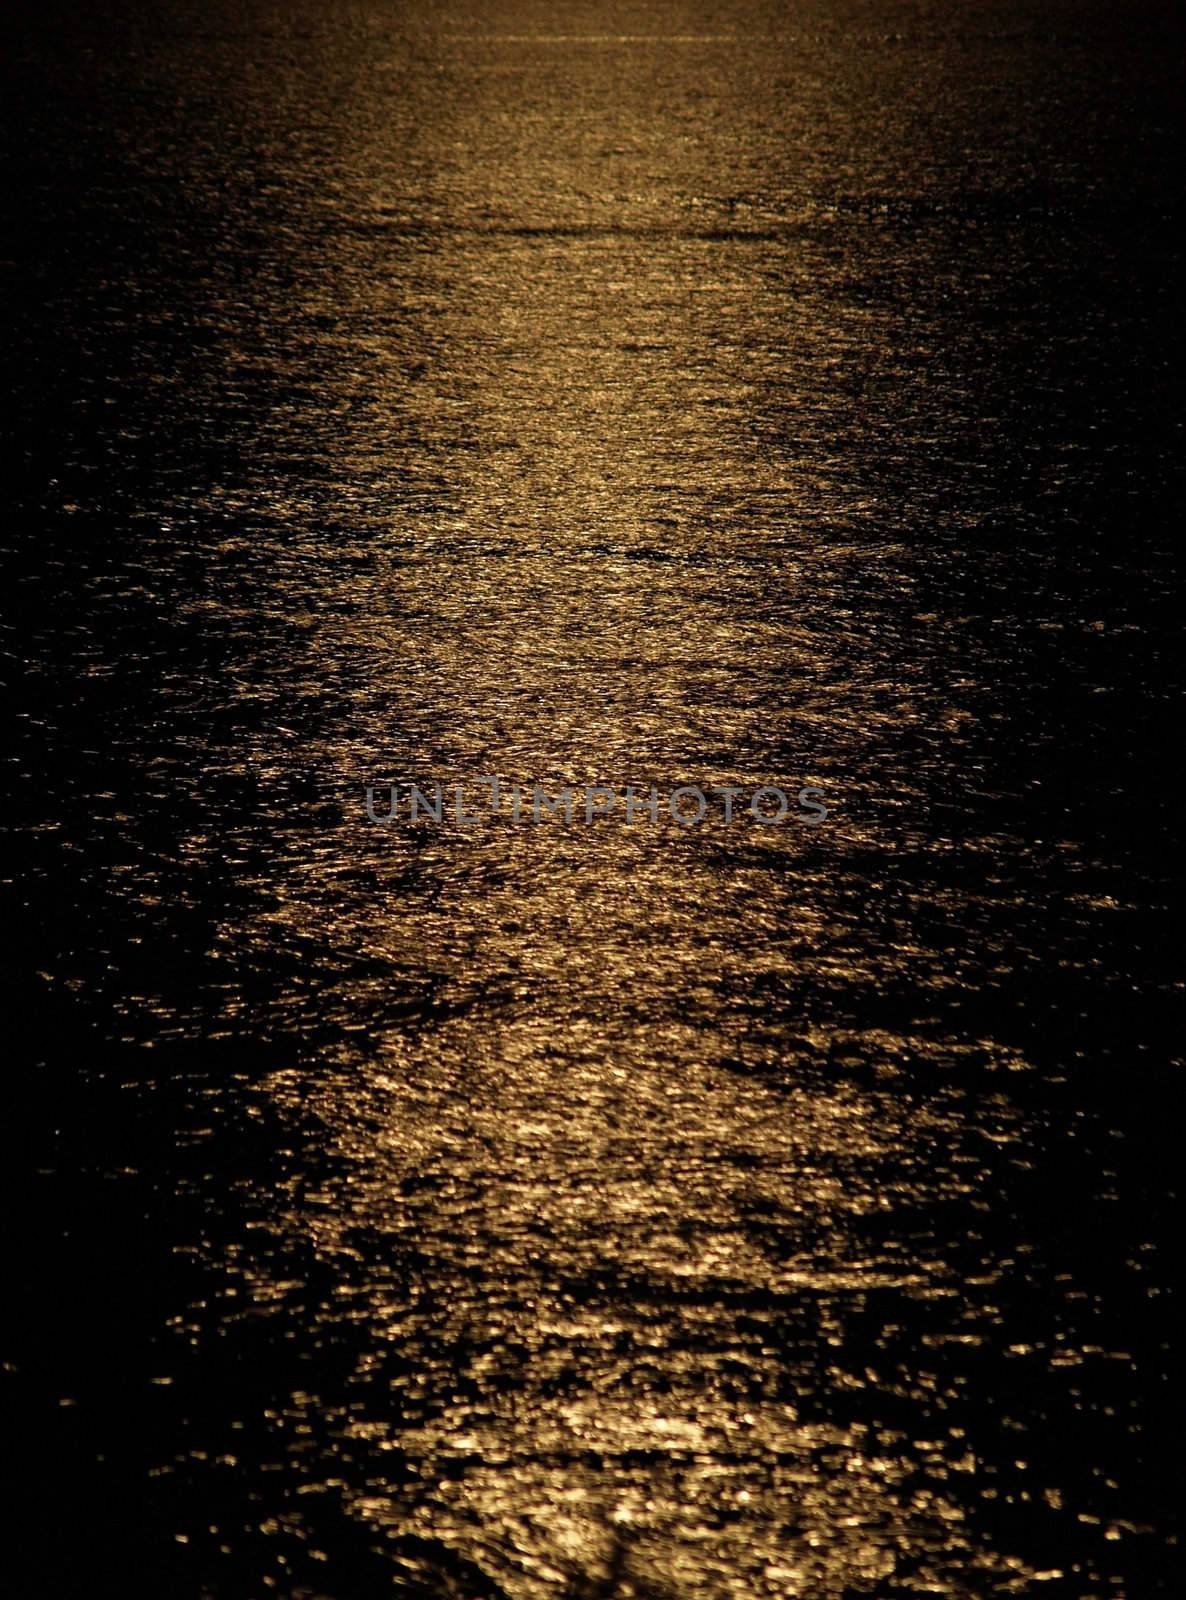 Moon light reflection on calm but rippled water